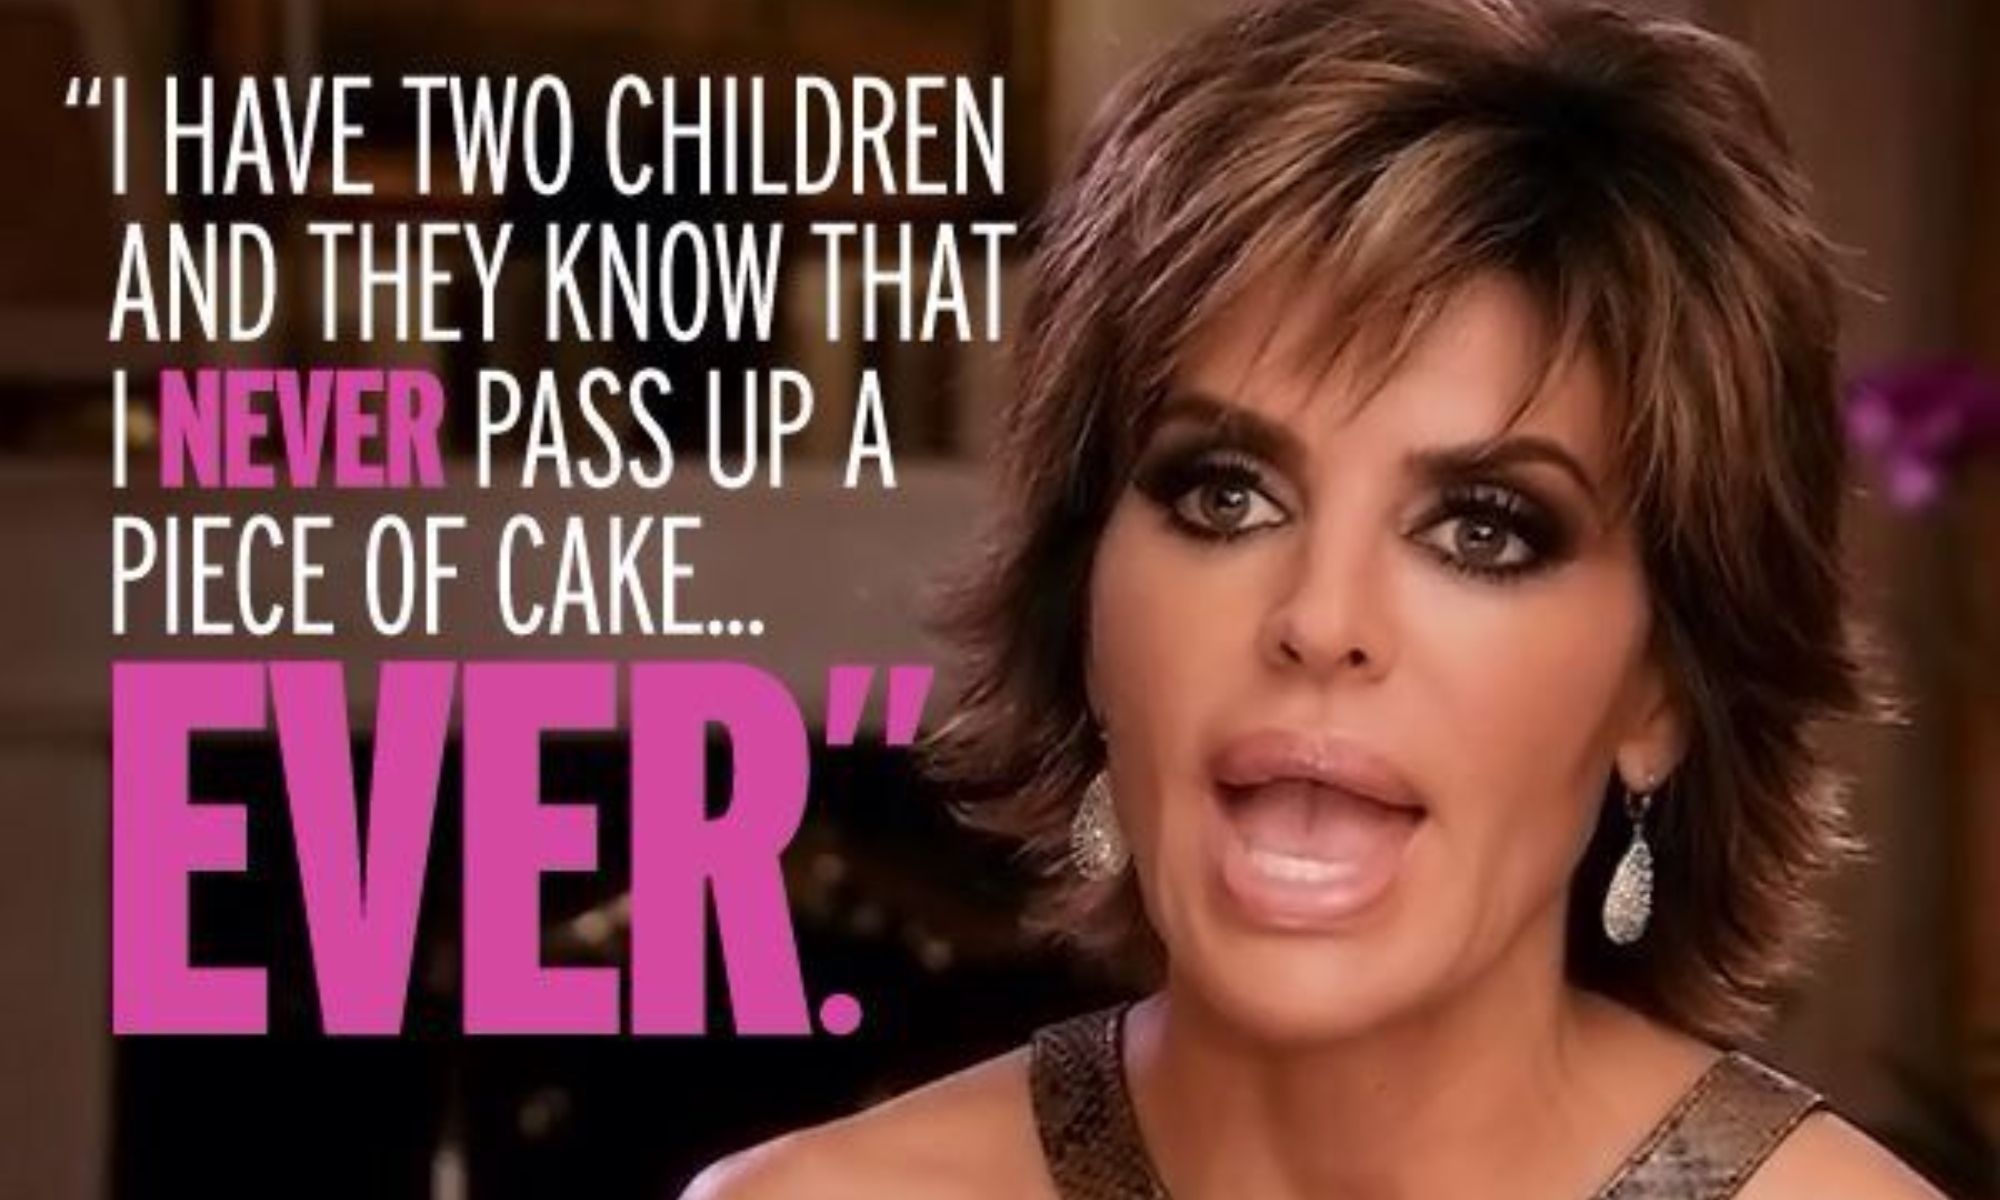 Lisa Rinna from RHOBH talking about cake